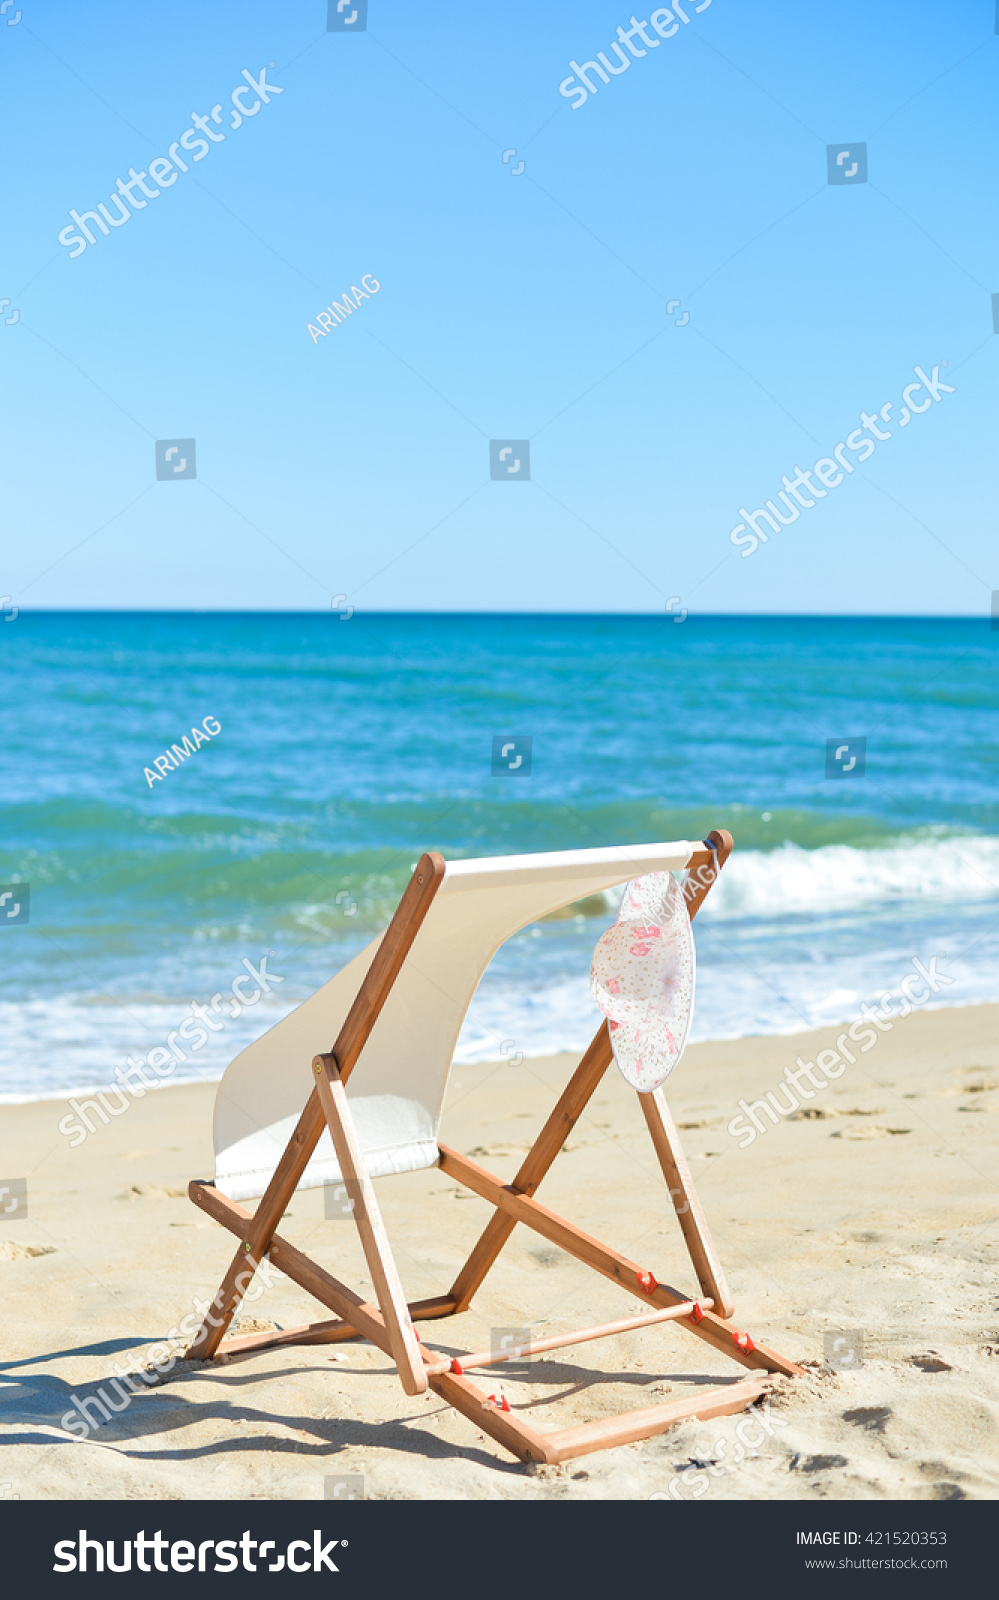 Female hat and deckchair on the beach vacation, sunny outdoors background #421520353